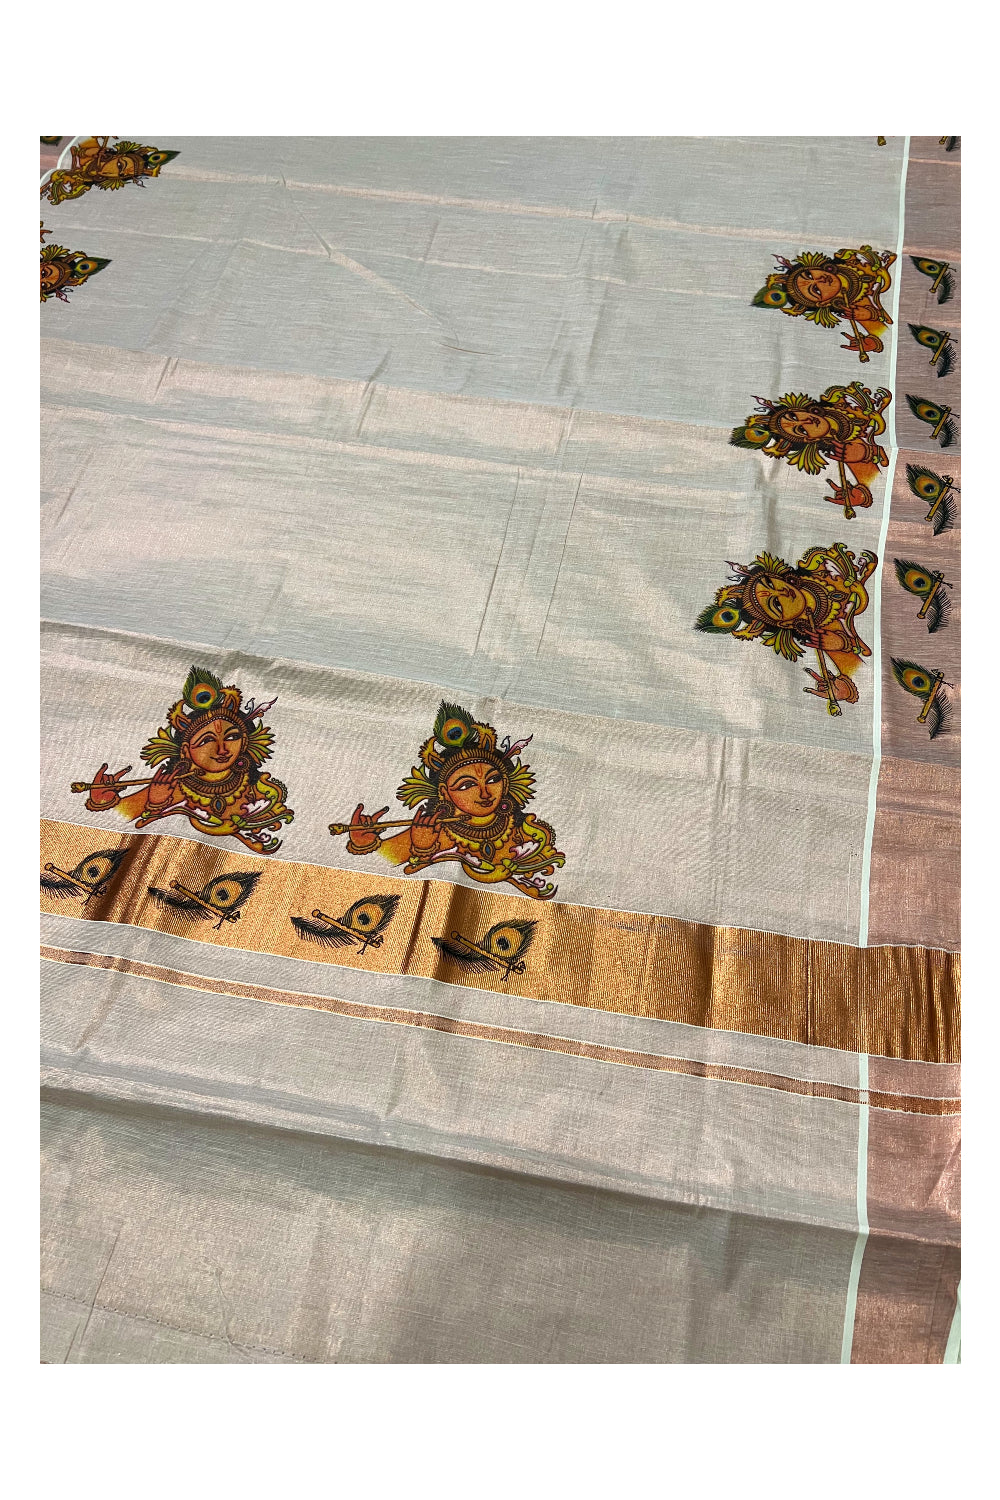 Kerala Copper Tissue Kasavu Saree With Mural Printed Krishna Face Design and Feather Prints on Border